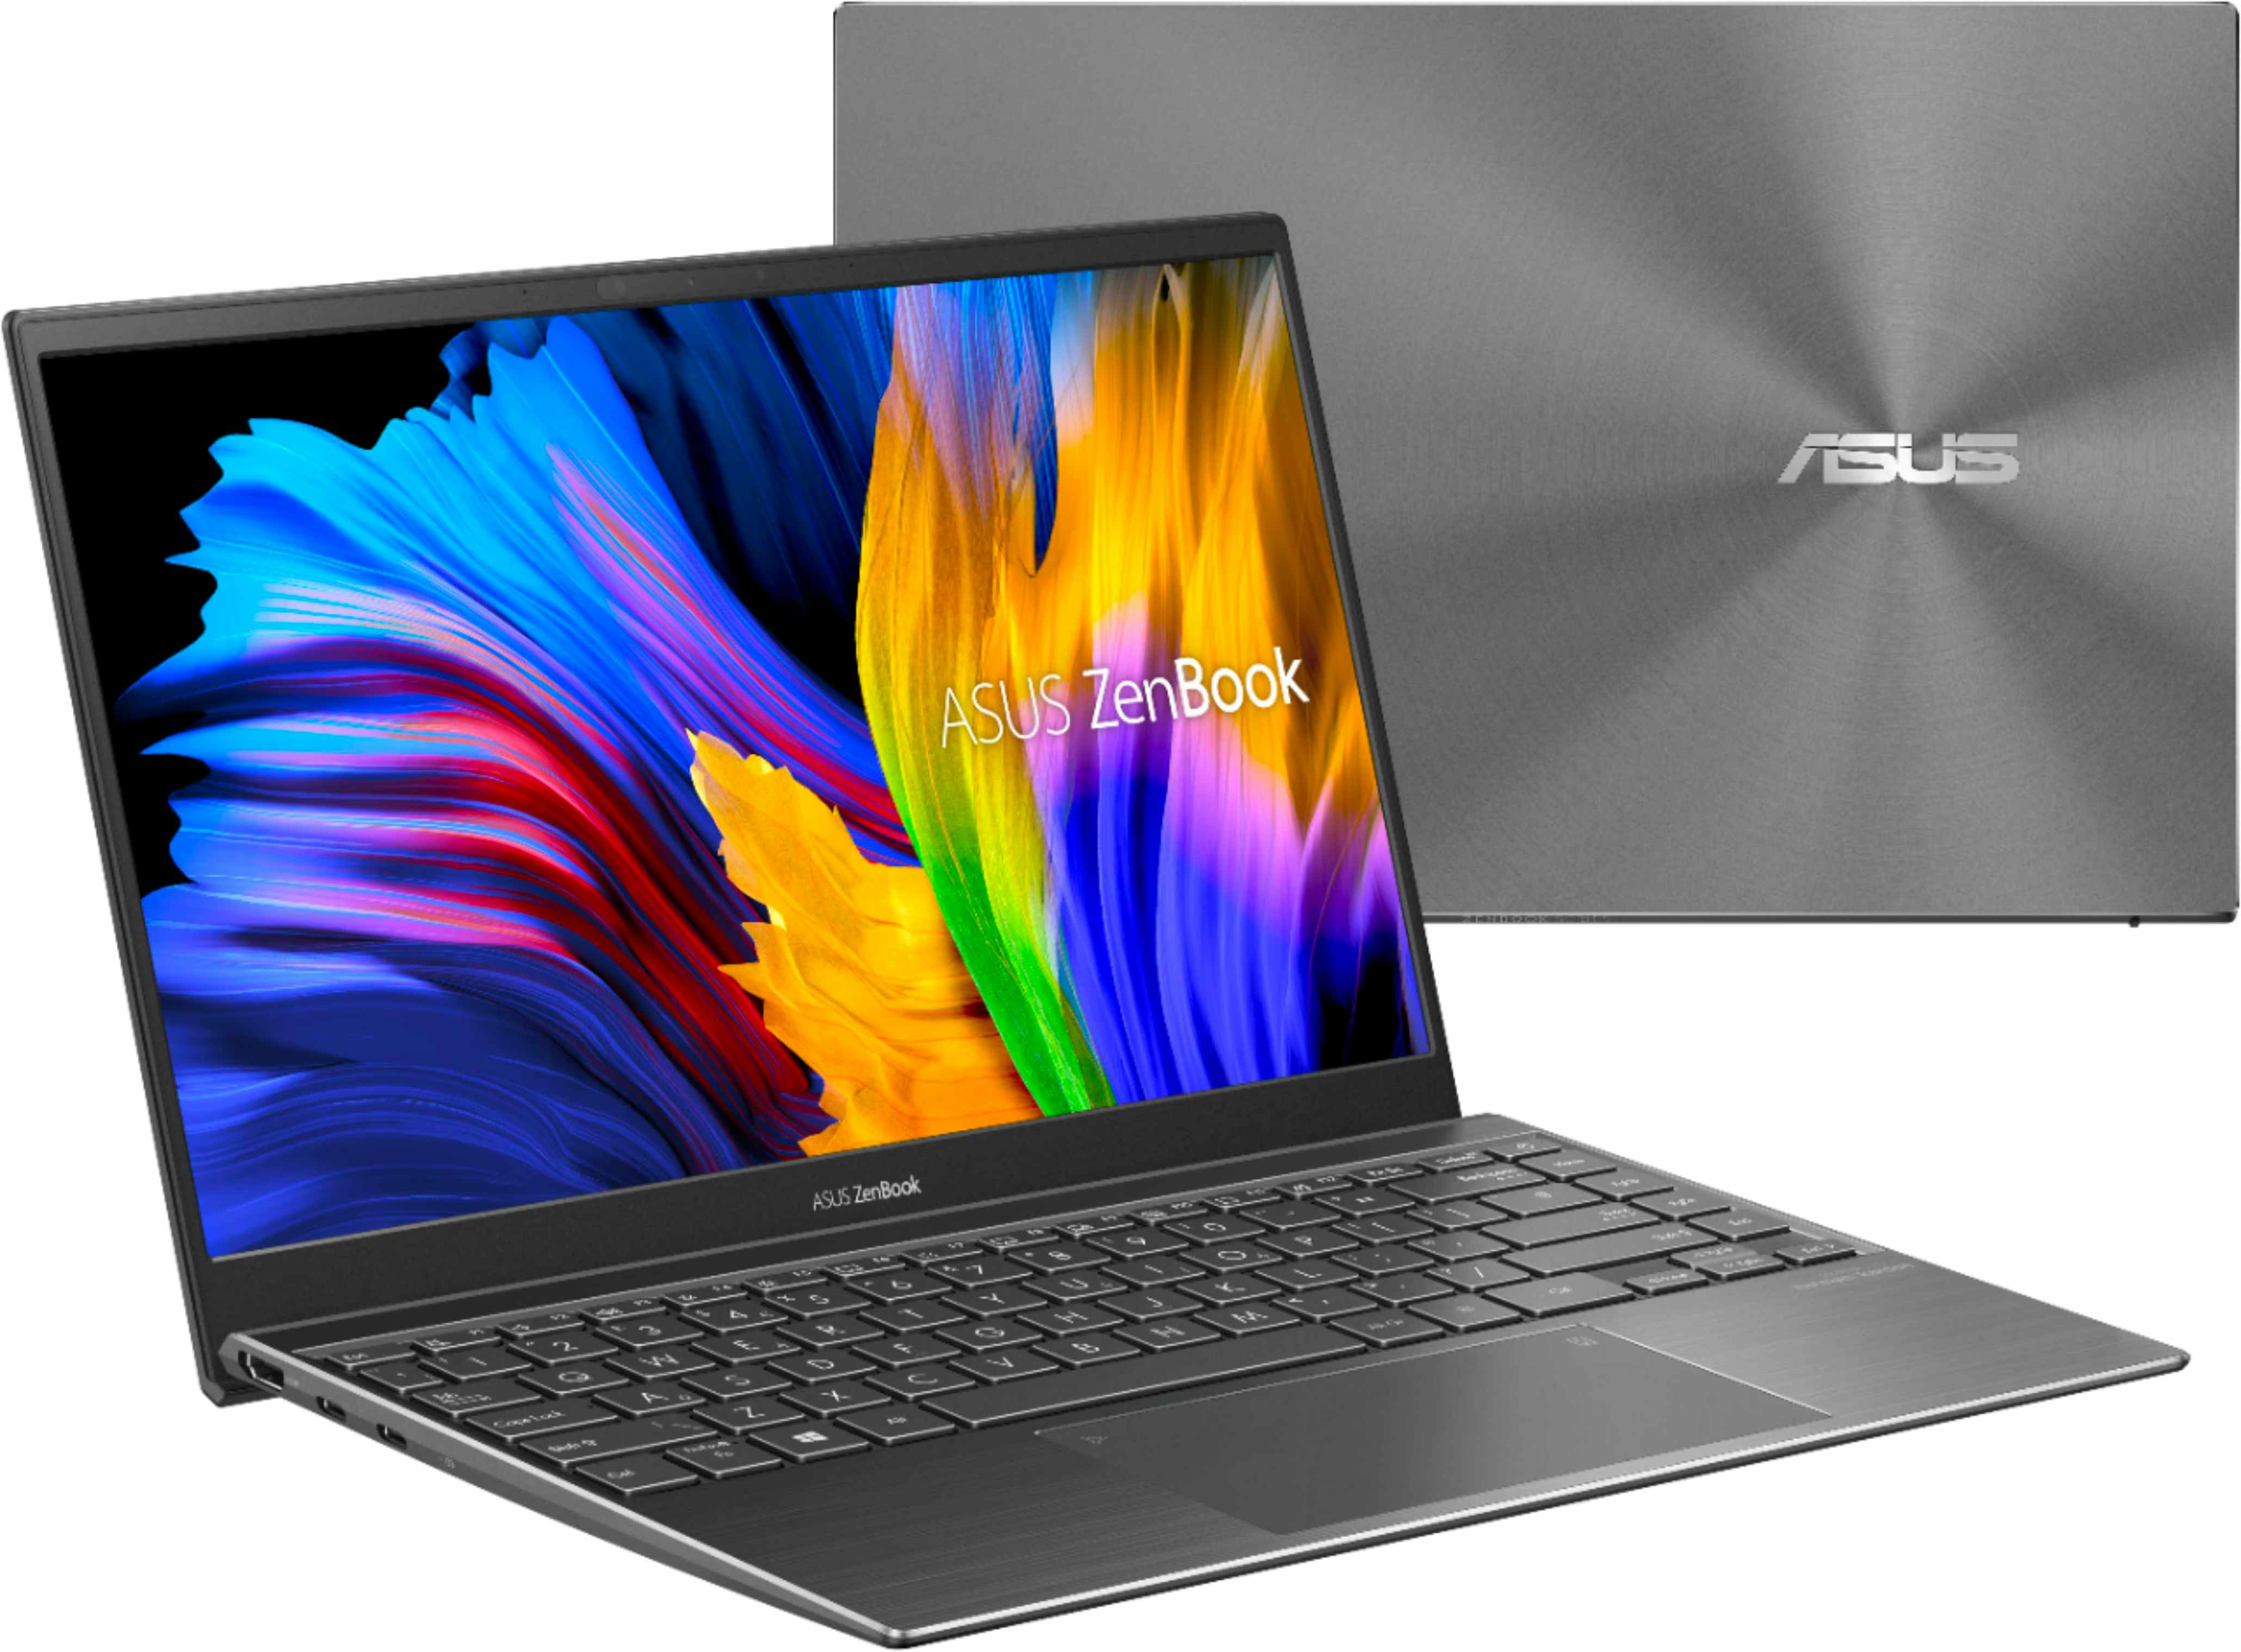 A ASUS Zenbook 5500U on a white background